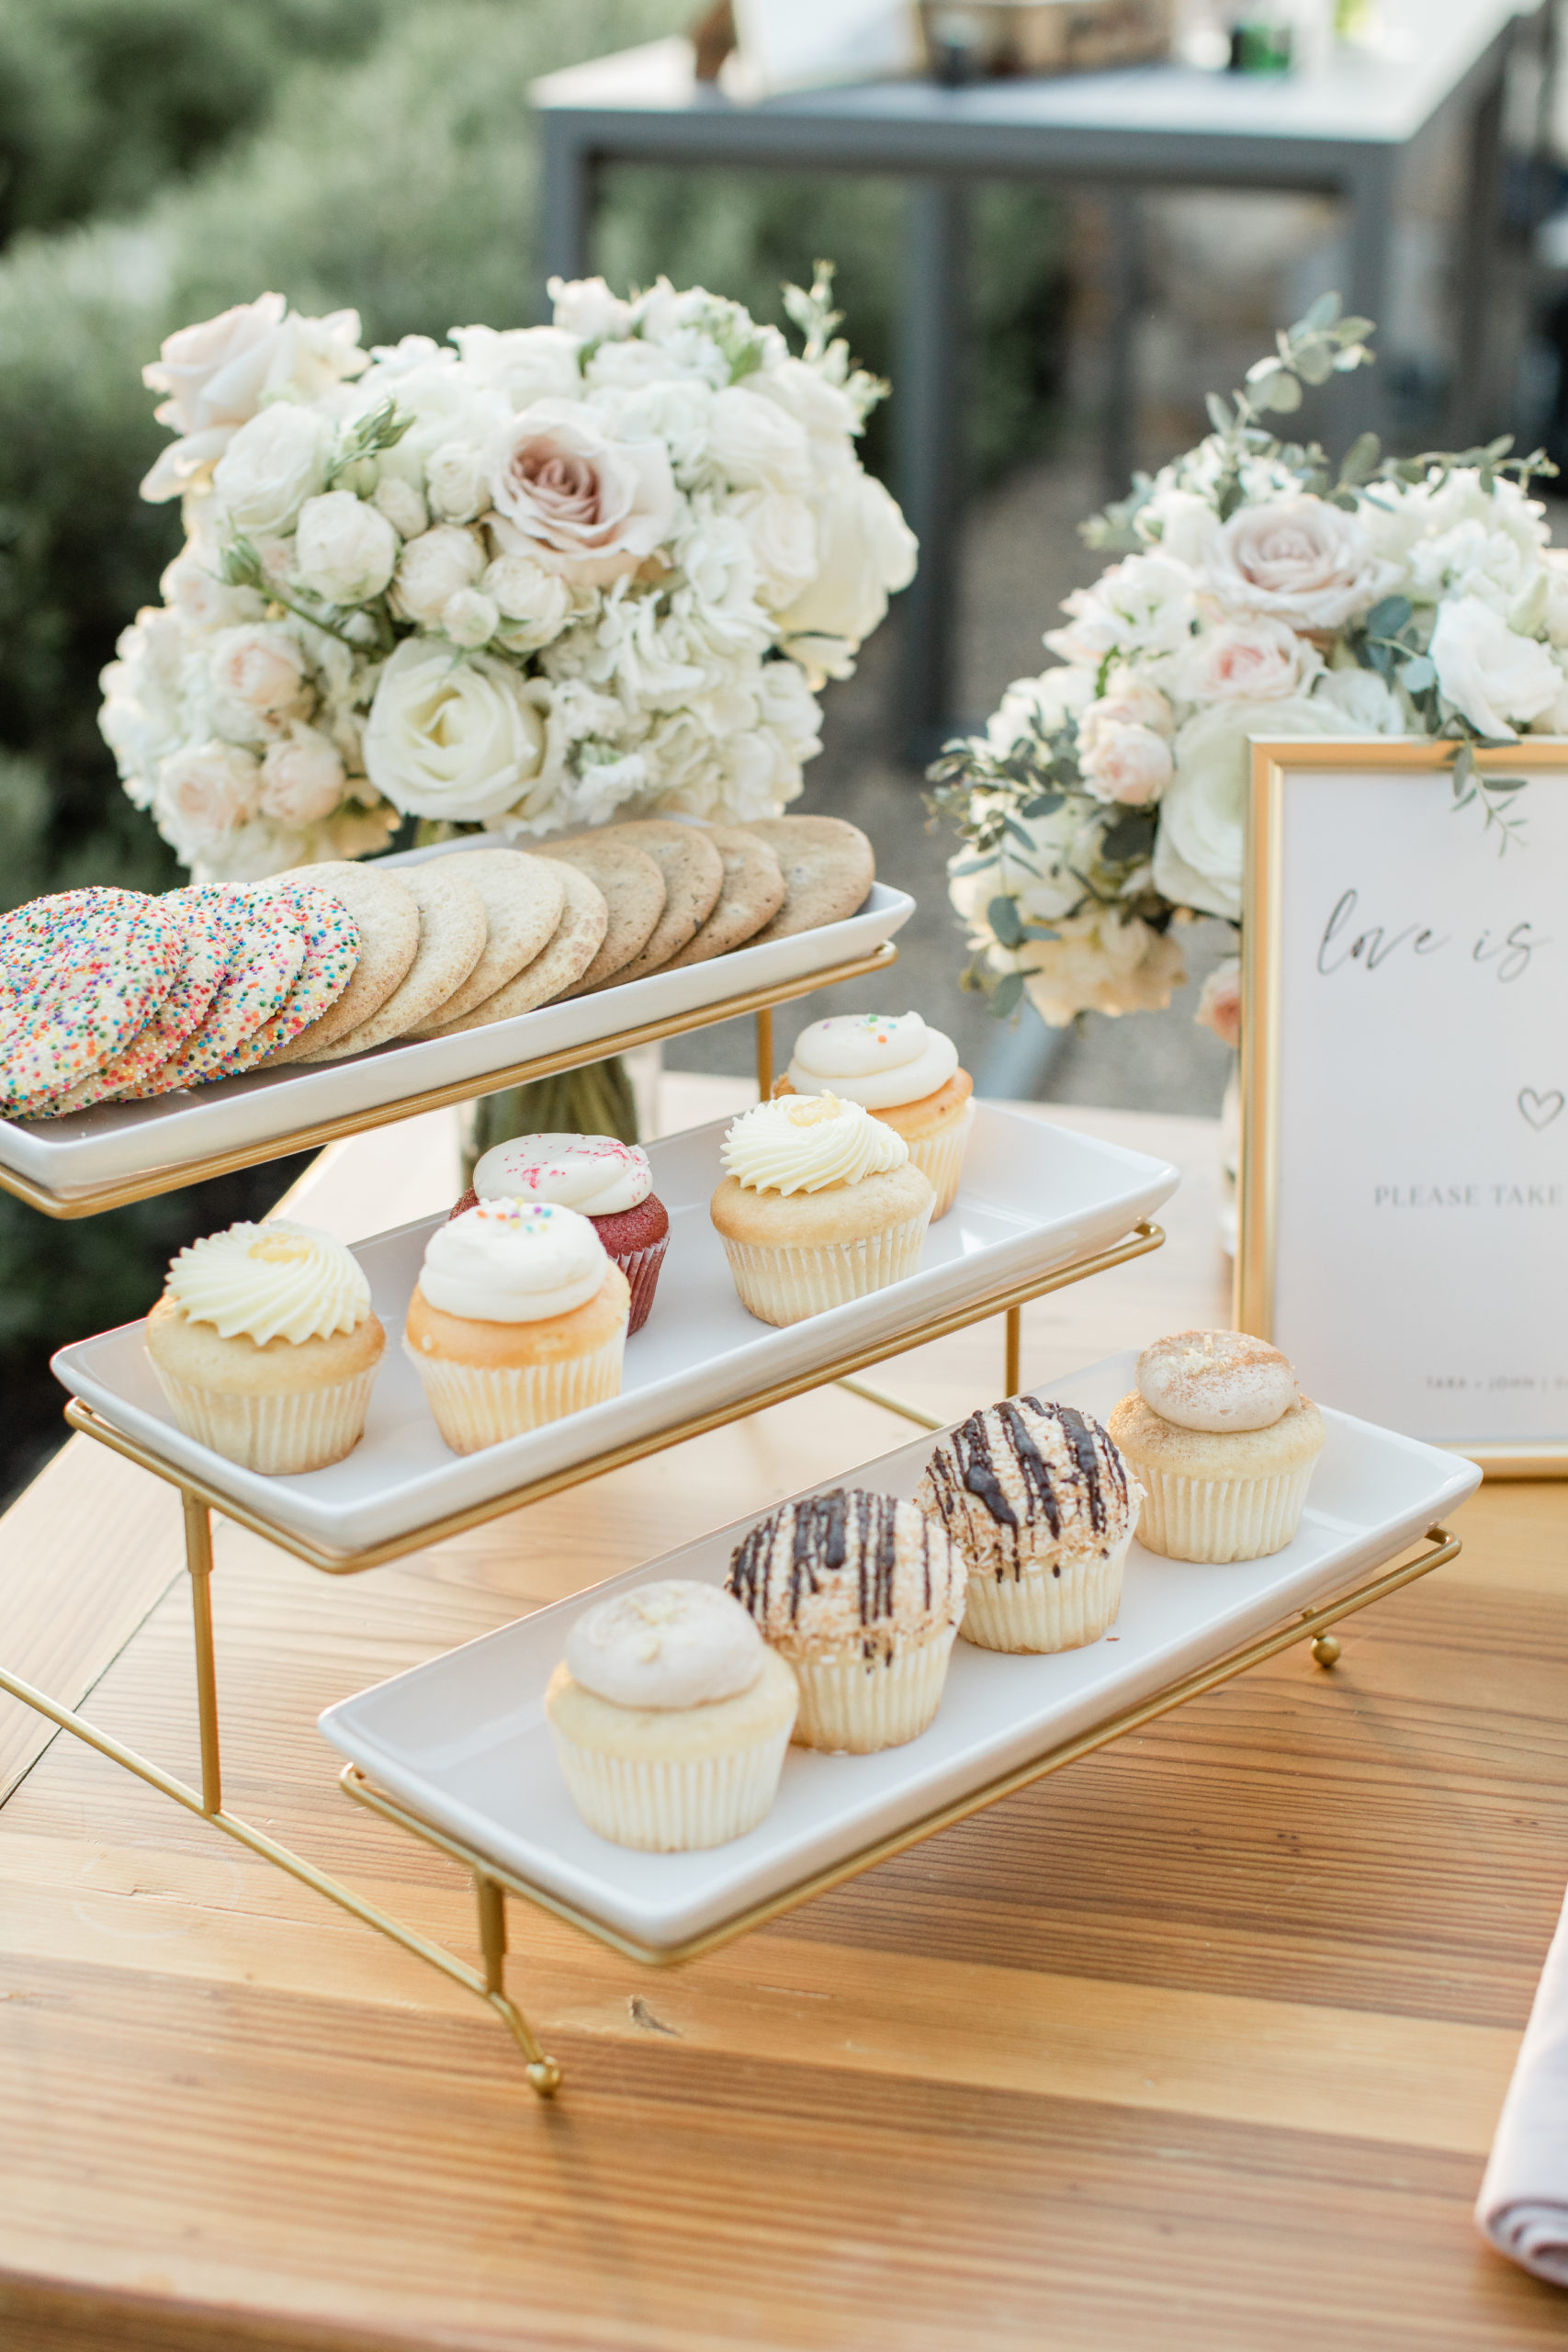 A wedding dessert table with a 3-tier gold dessert tray, holding cookies and cupcakes.